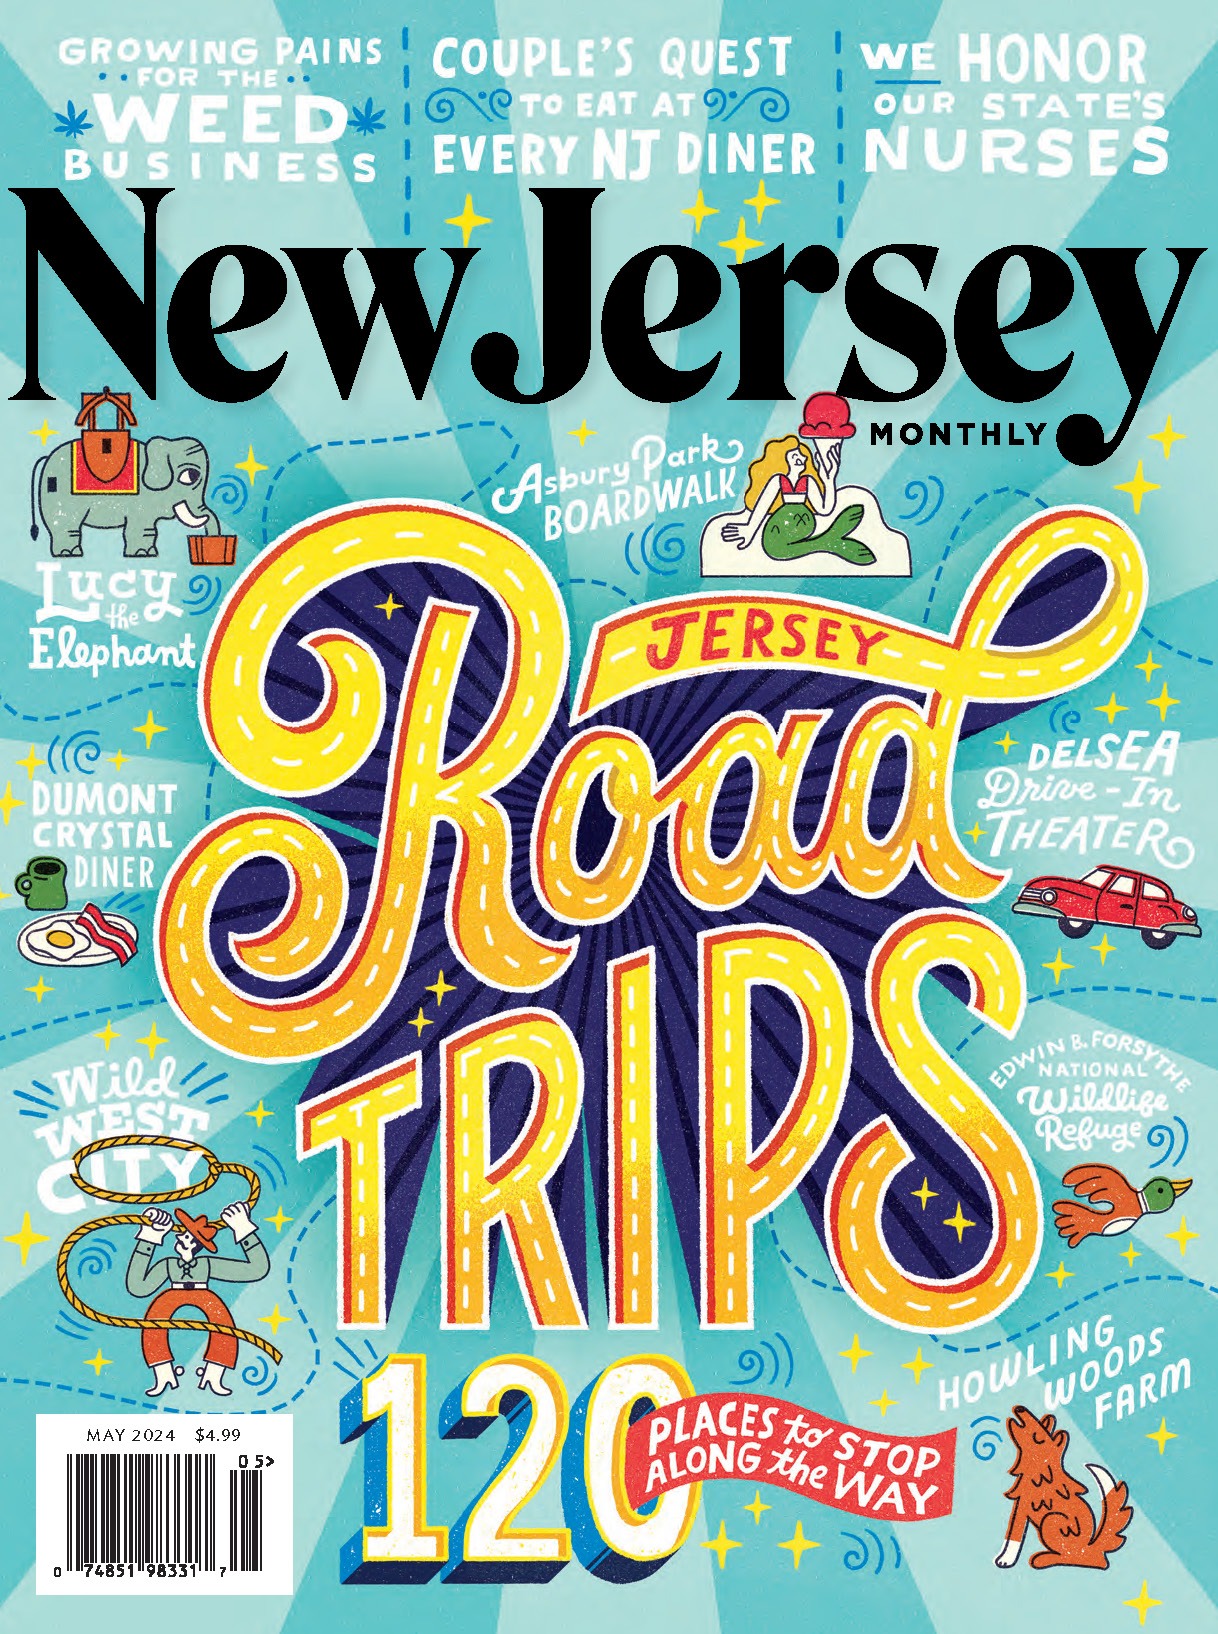 May 2024 cover of New Jersey Monthly magazine